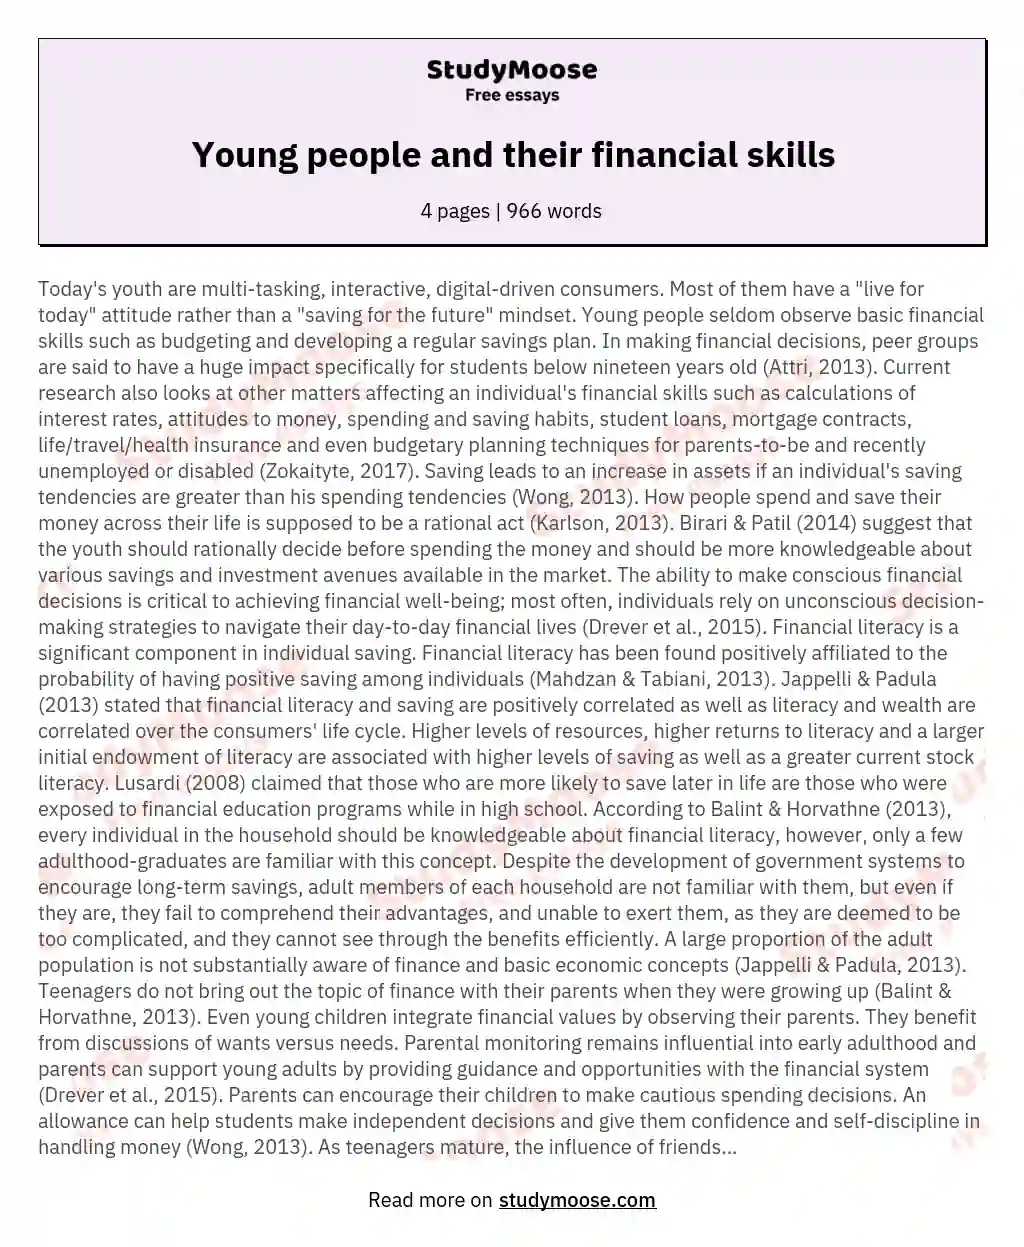 Young people and their financial skills essay